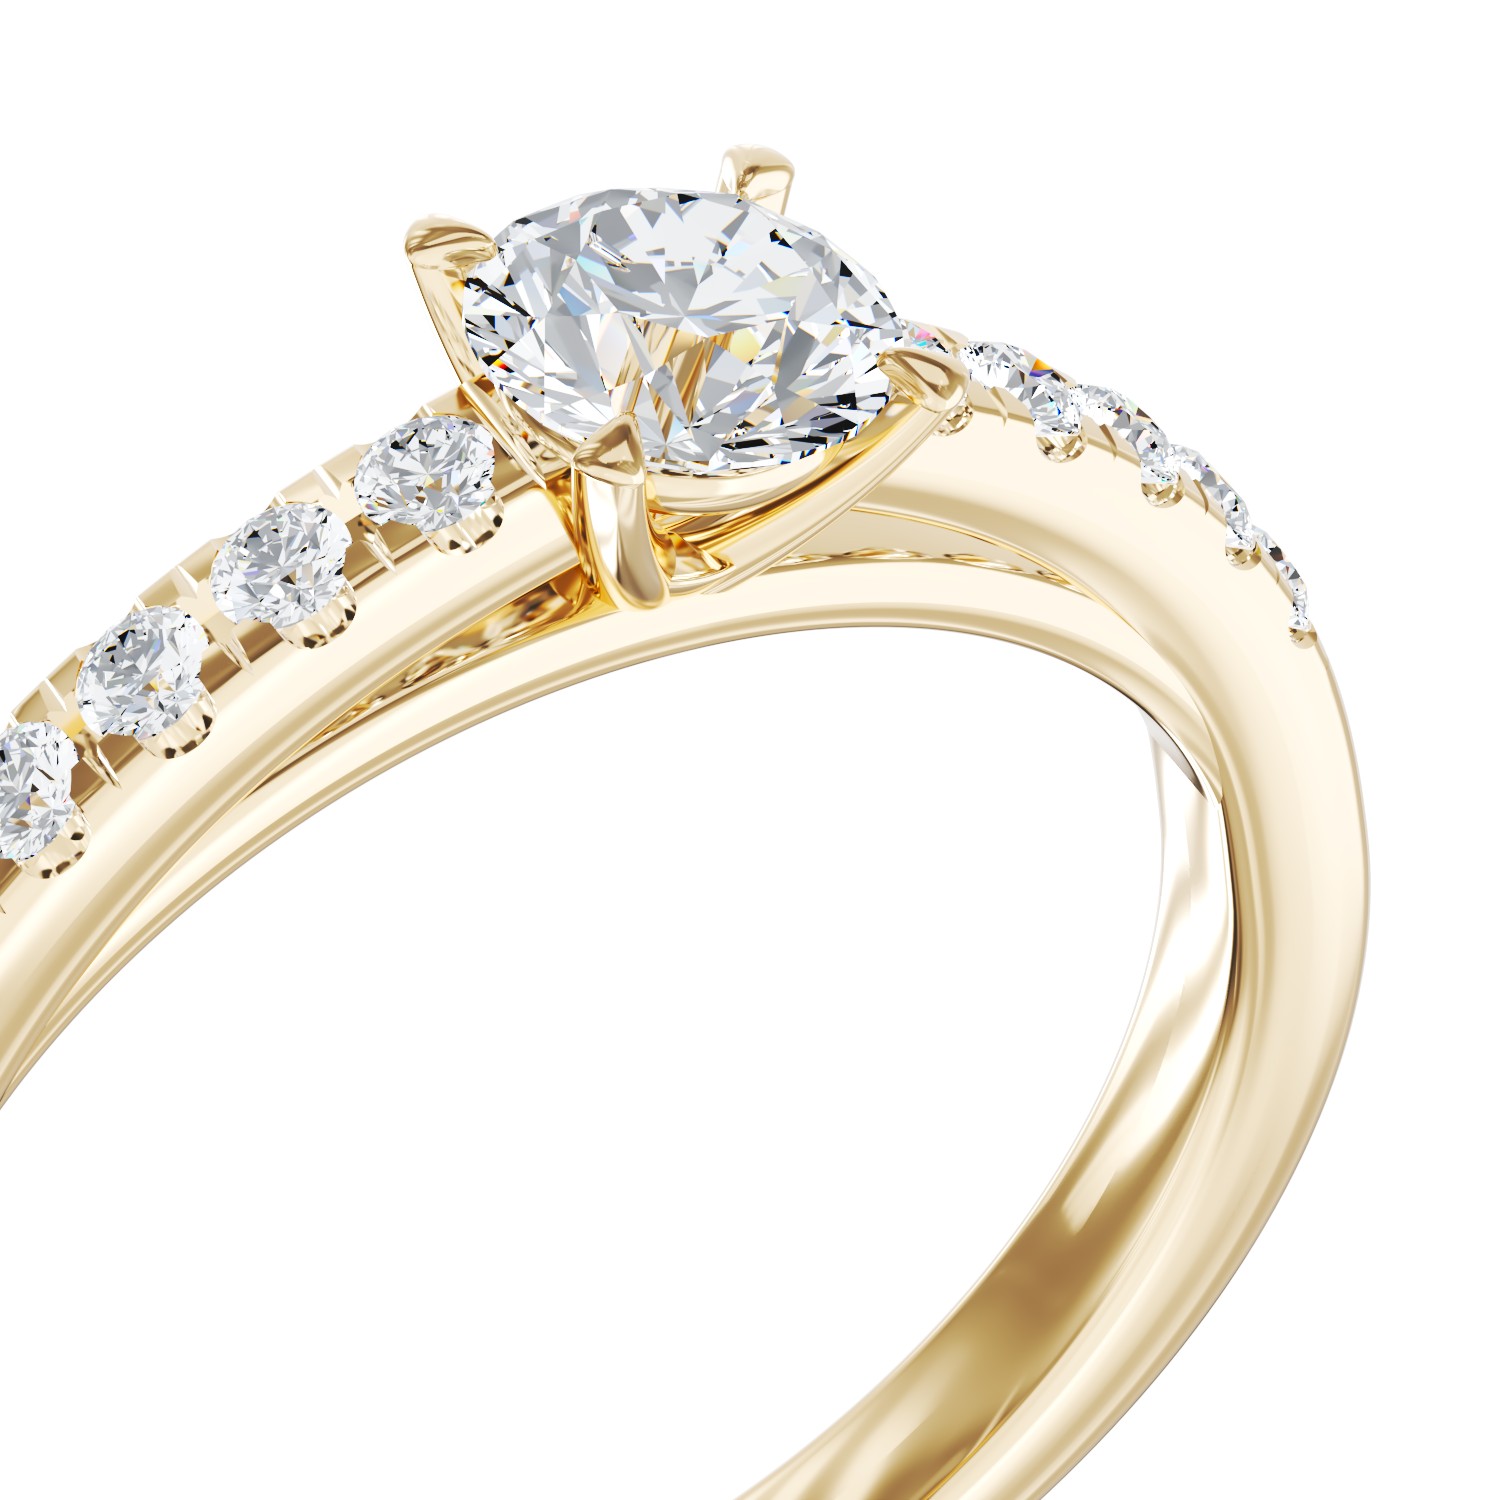 18K yellow gold engagement ring with 0.4ct diamond and 0.14ct diamonds